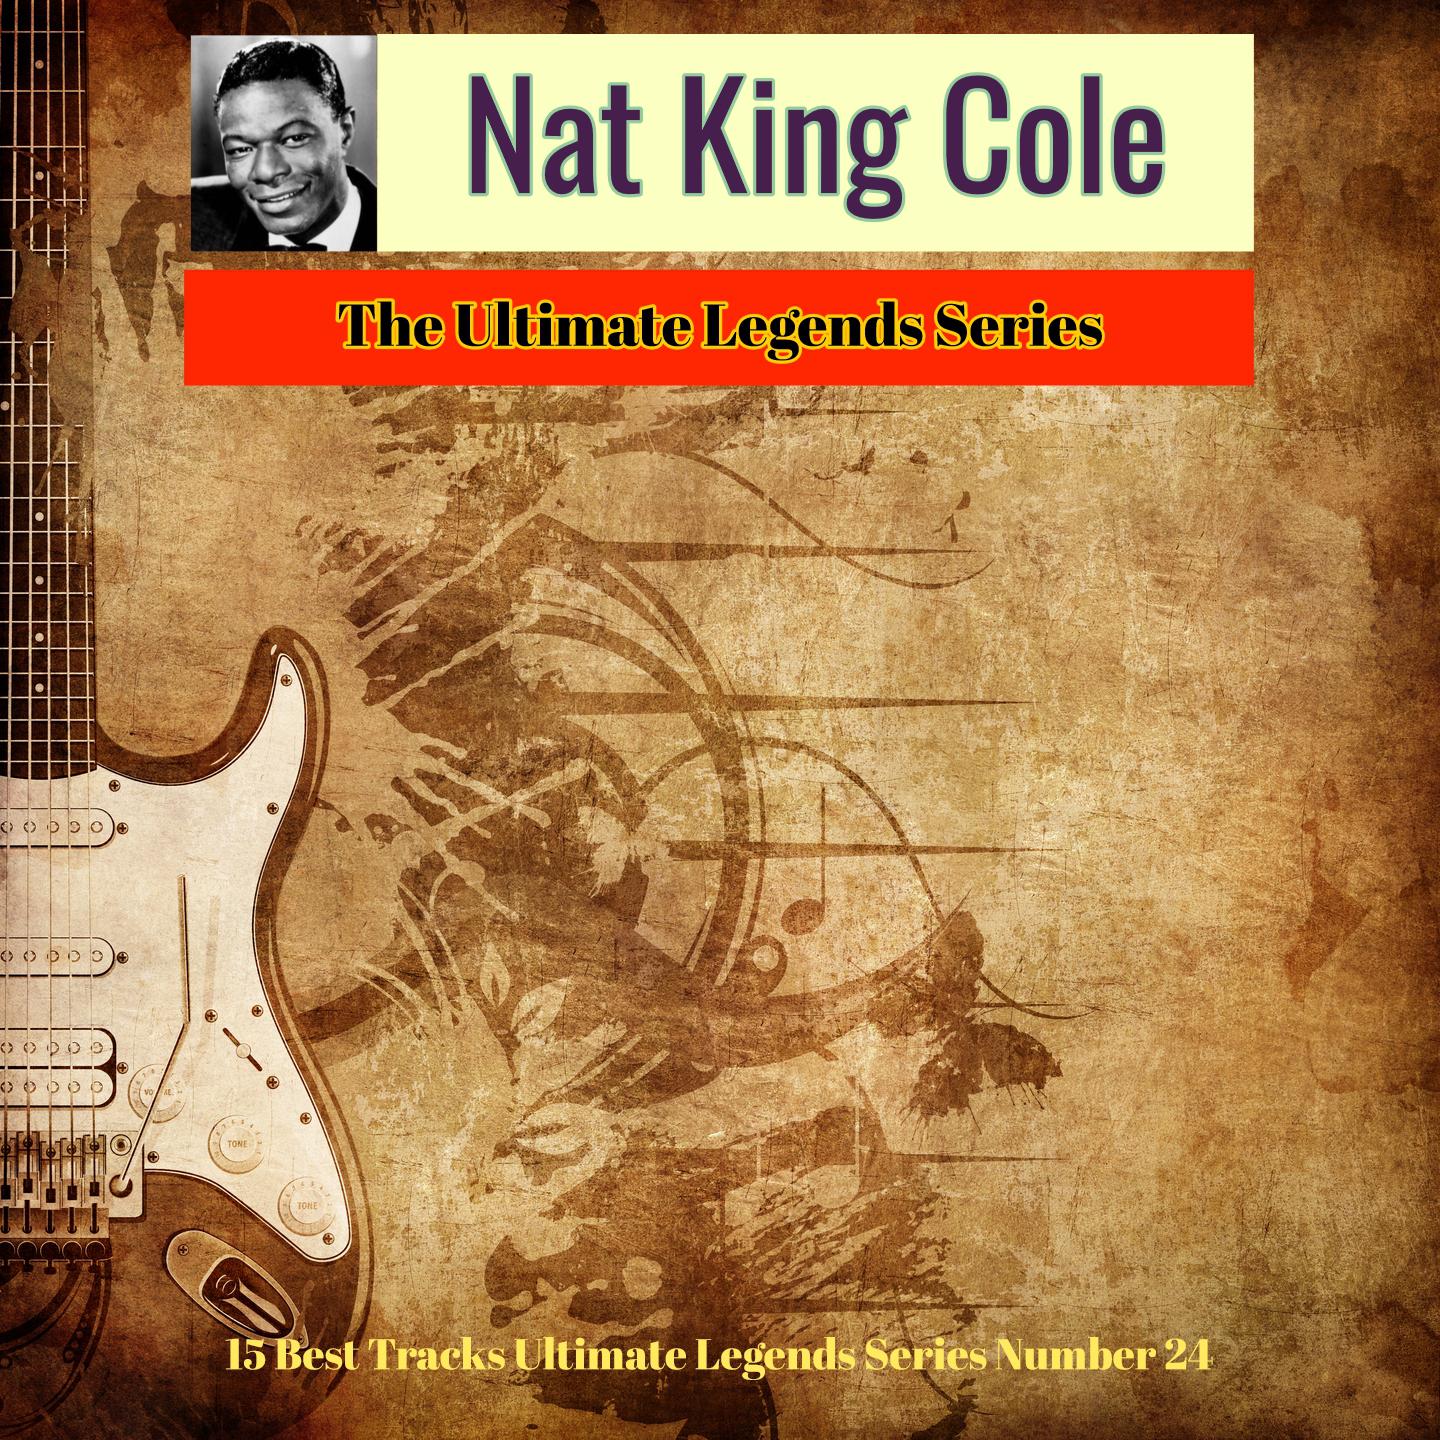 Nat King Cole - The Ultimate Legends Series (15 Best Tracks Ultimate Legends Series Number 24)